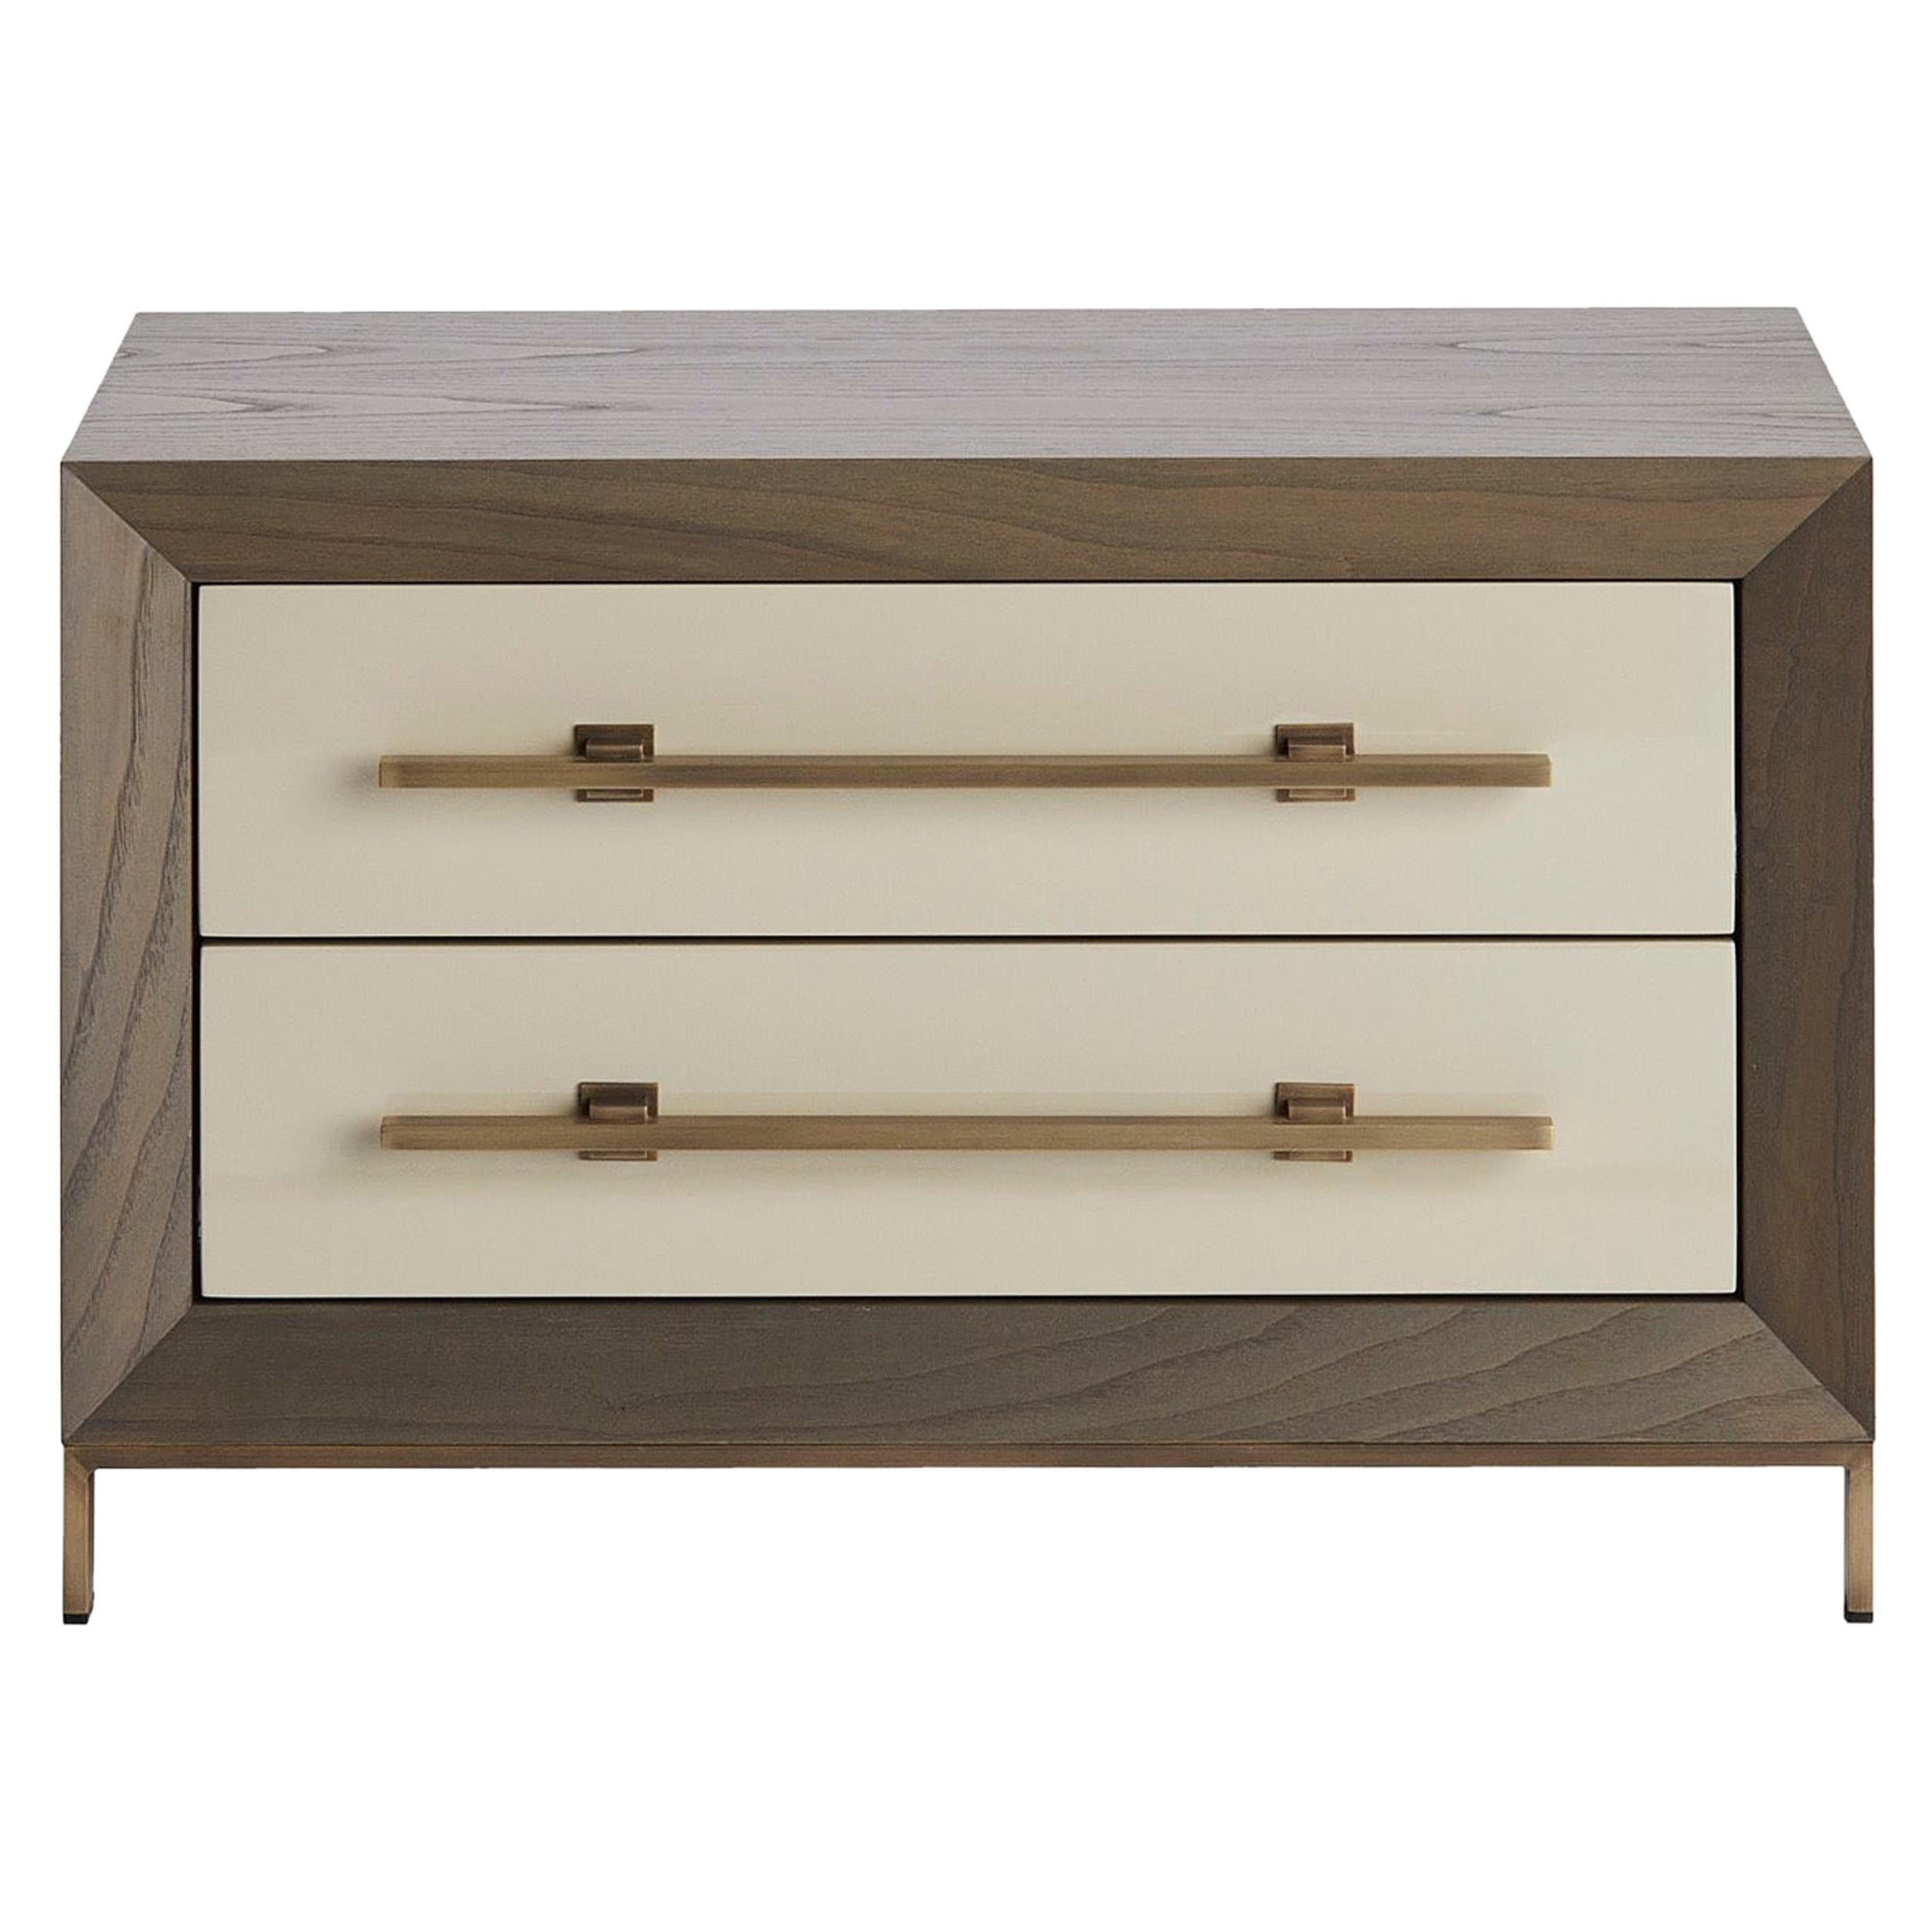 MAGNA Nightstand in Chestnut Structure and Lacquered Drawers For Sale